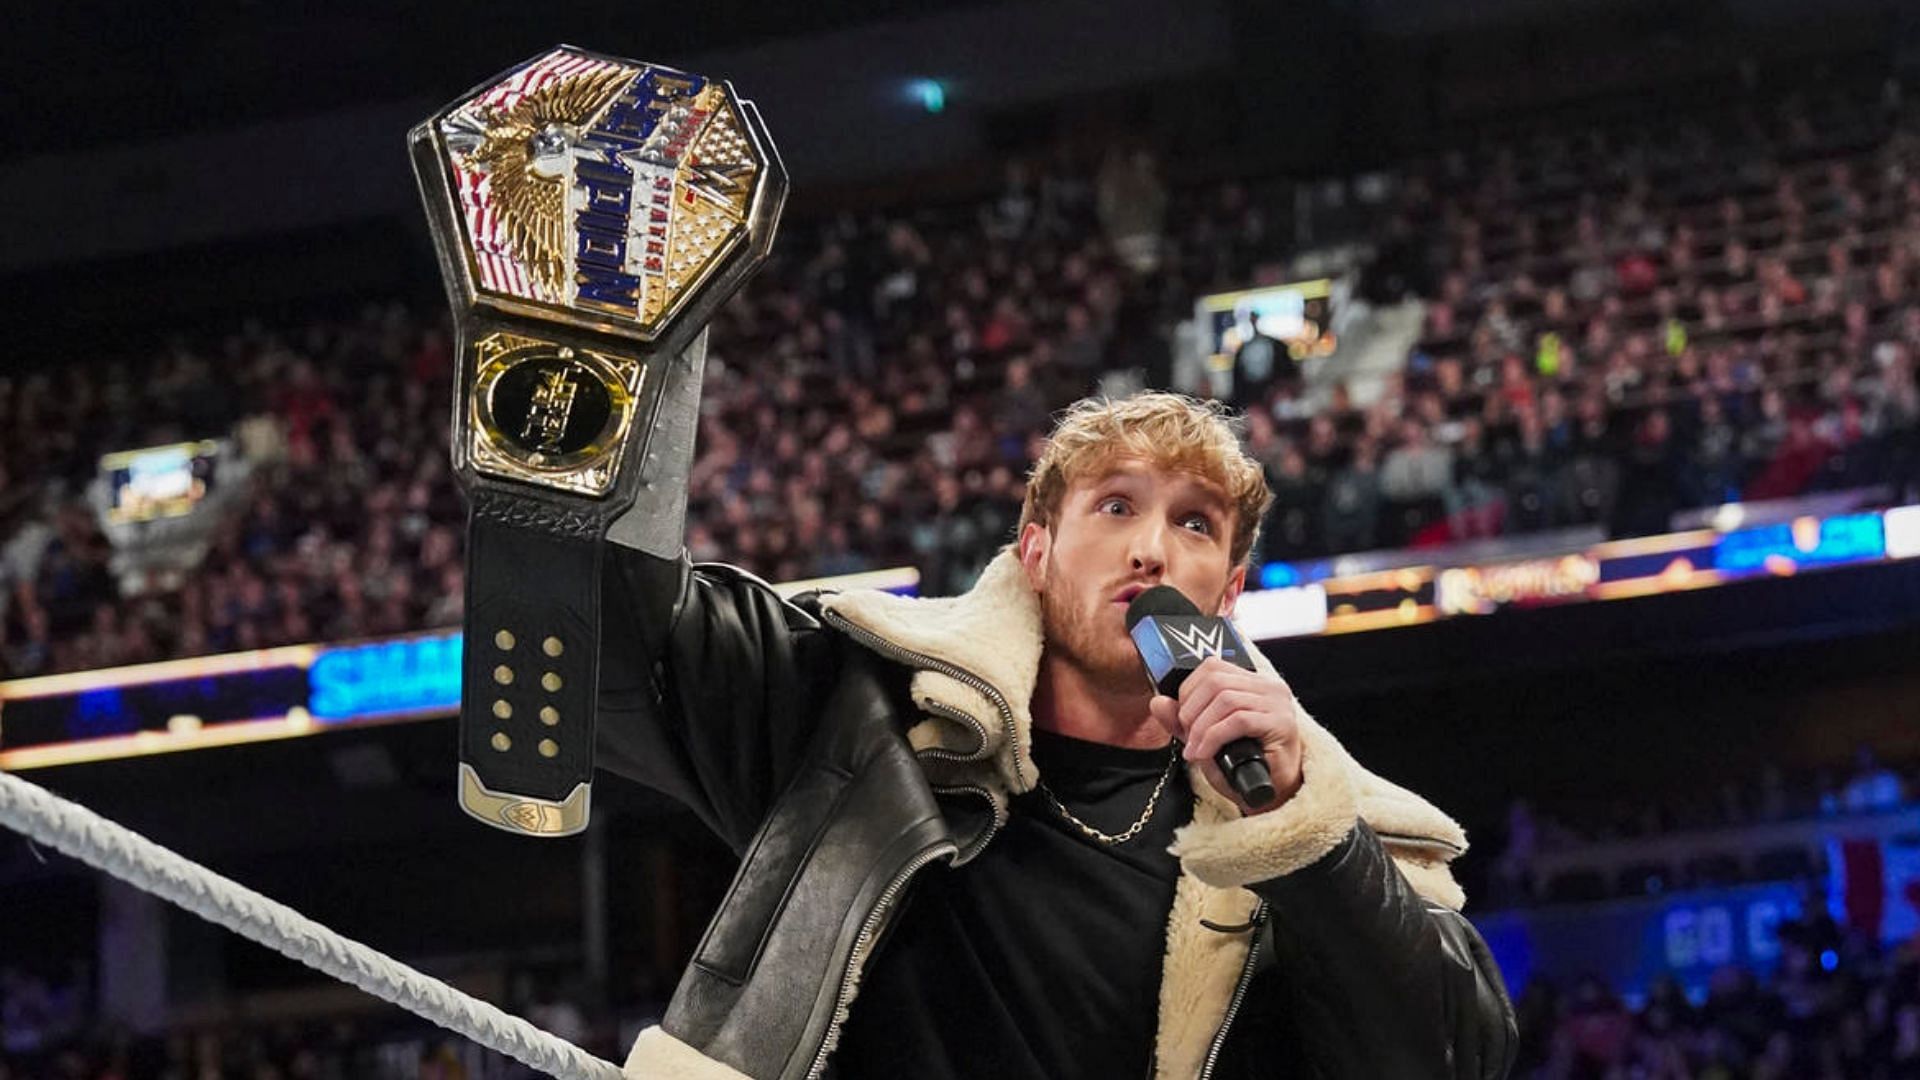 Logan Paul is the current United States Champion!